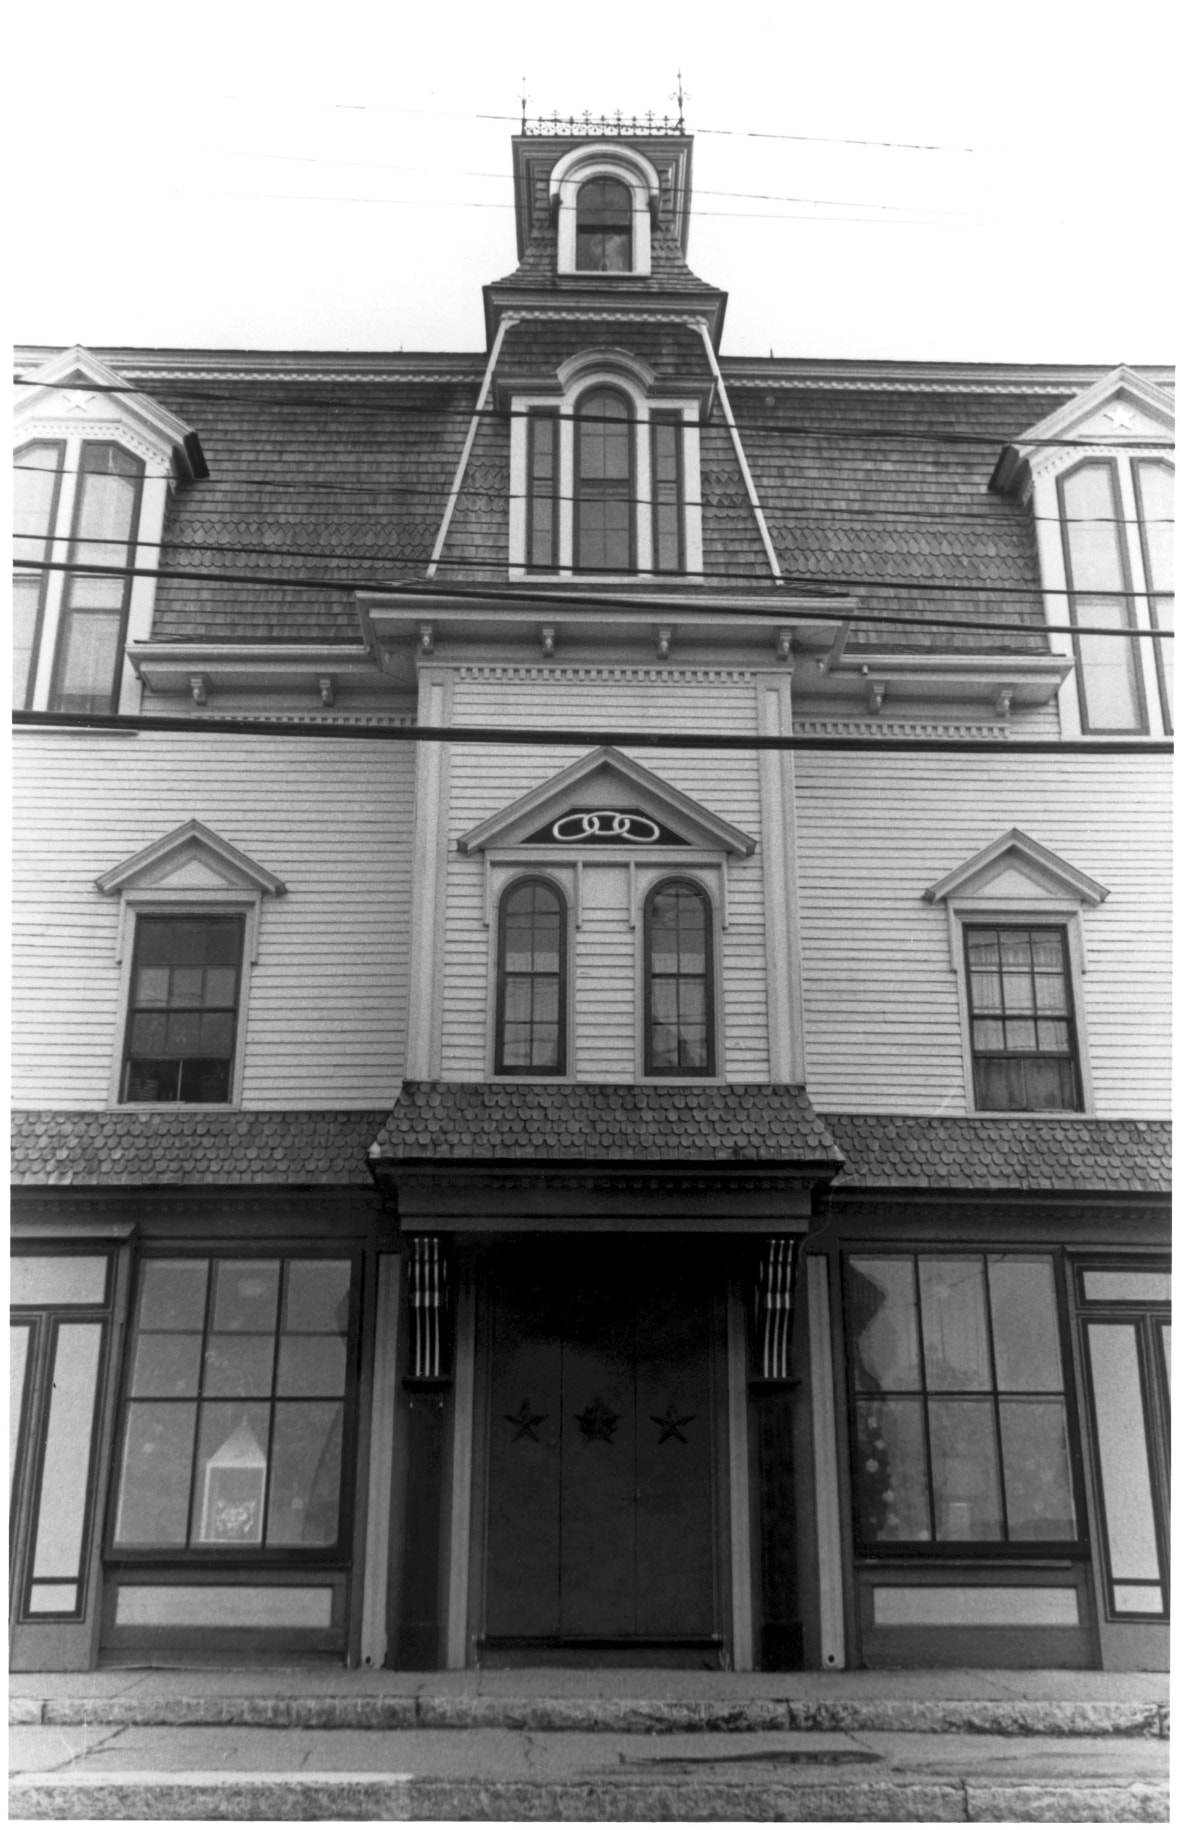 The Star of Hope, Vinalhaven, Maine; the three links, the symbol of the Independent Order of Odd Fellows, are visible above the central windows